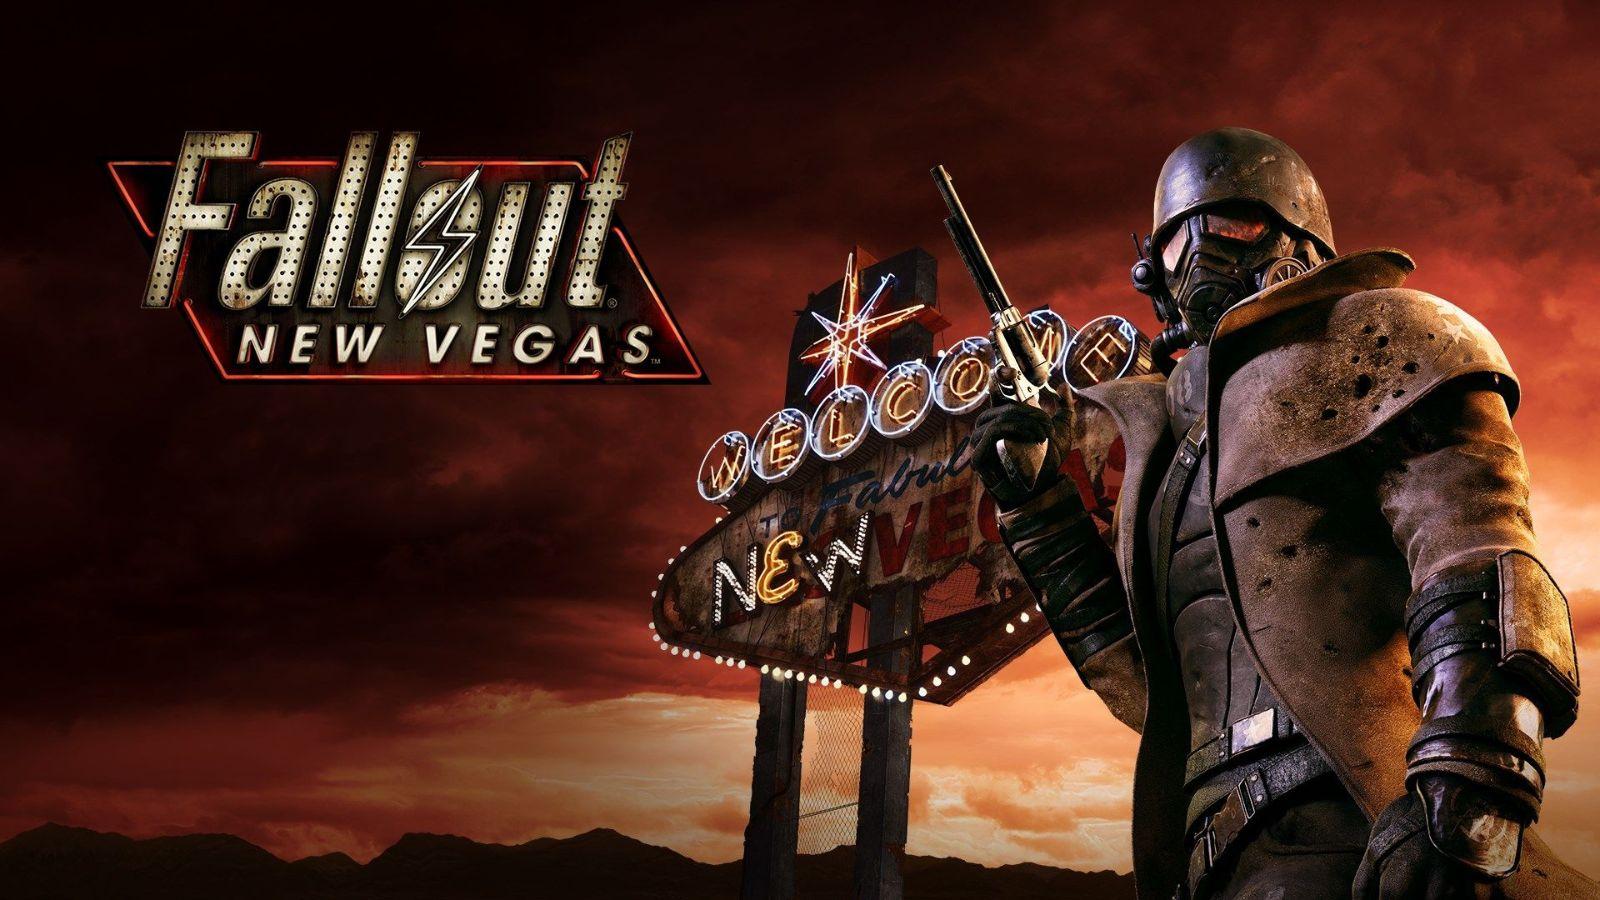 You can visit New Vegas again in a Fallout 4 mod